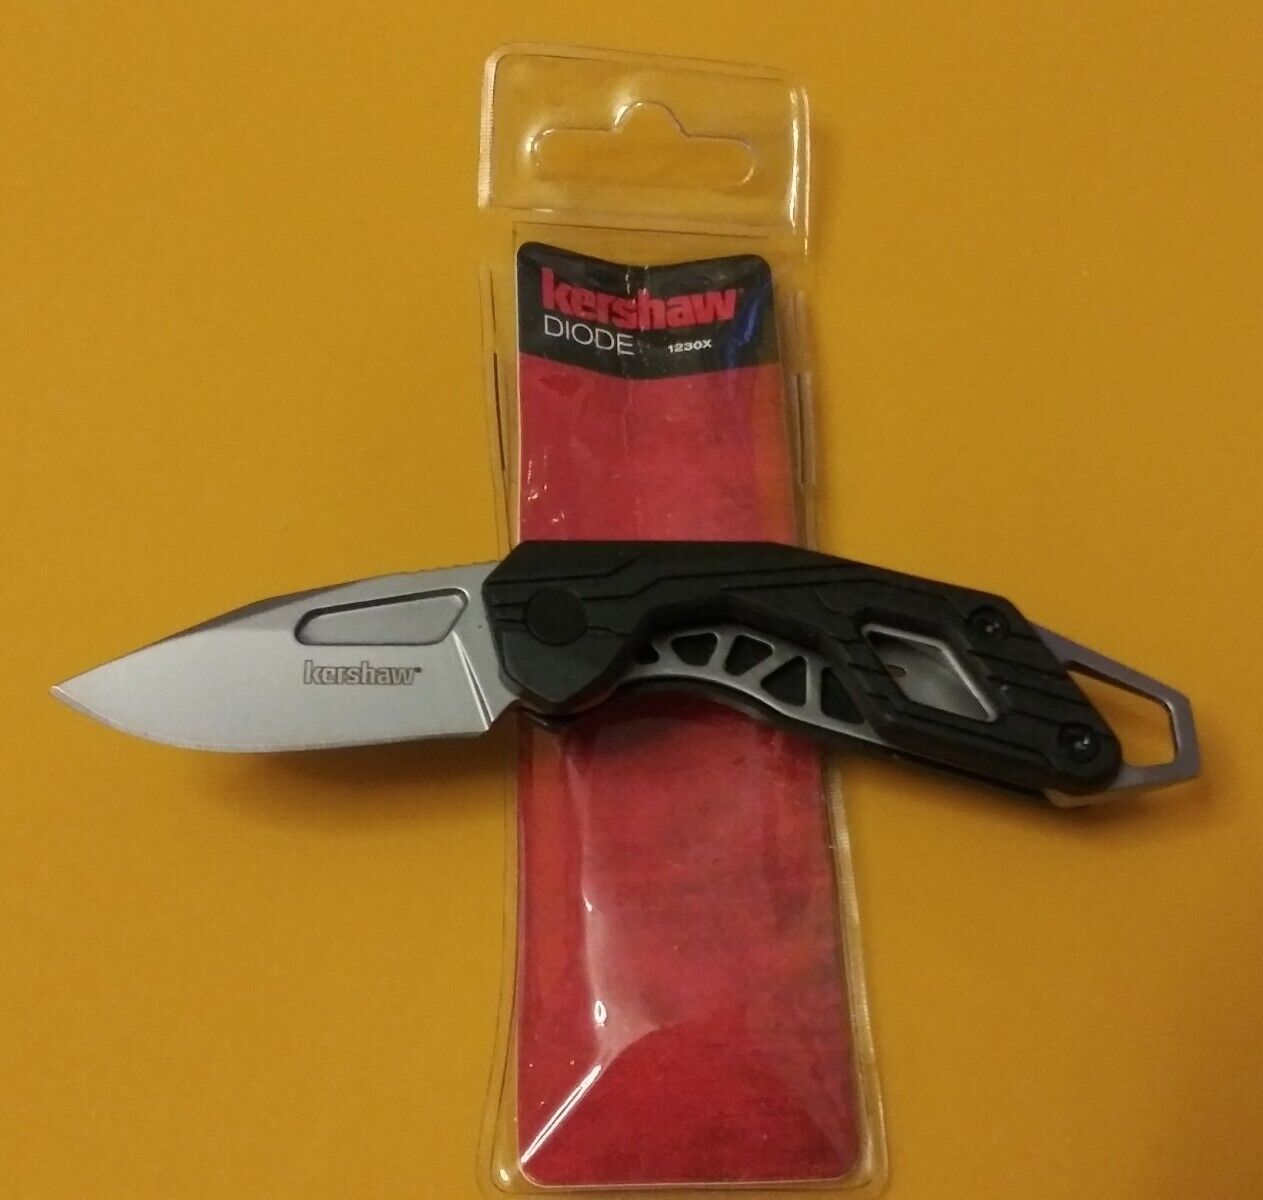 Kershaw Diode Small Mini Keychain Everyday Carry Folding Blade Pocket Knife New